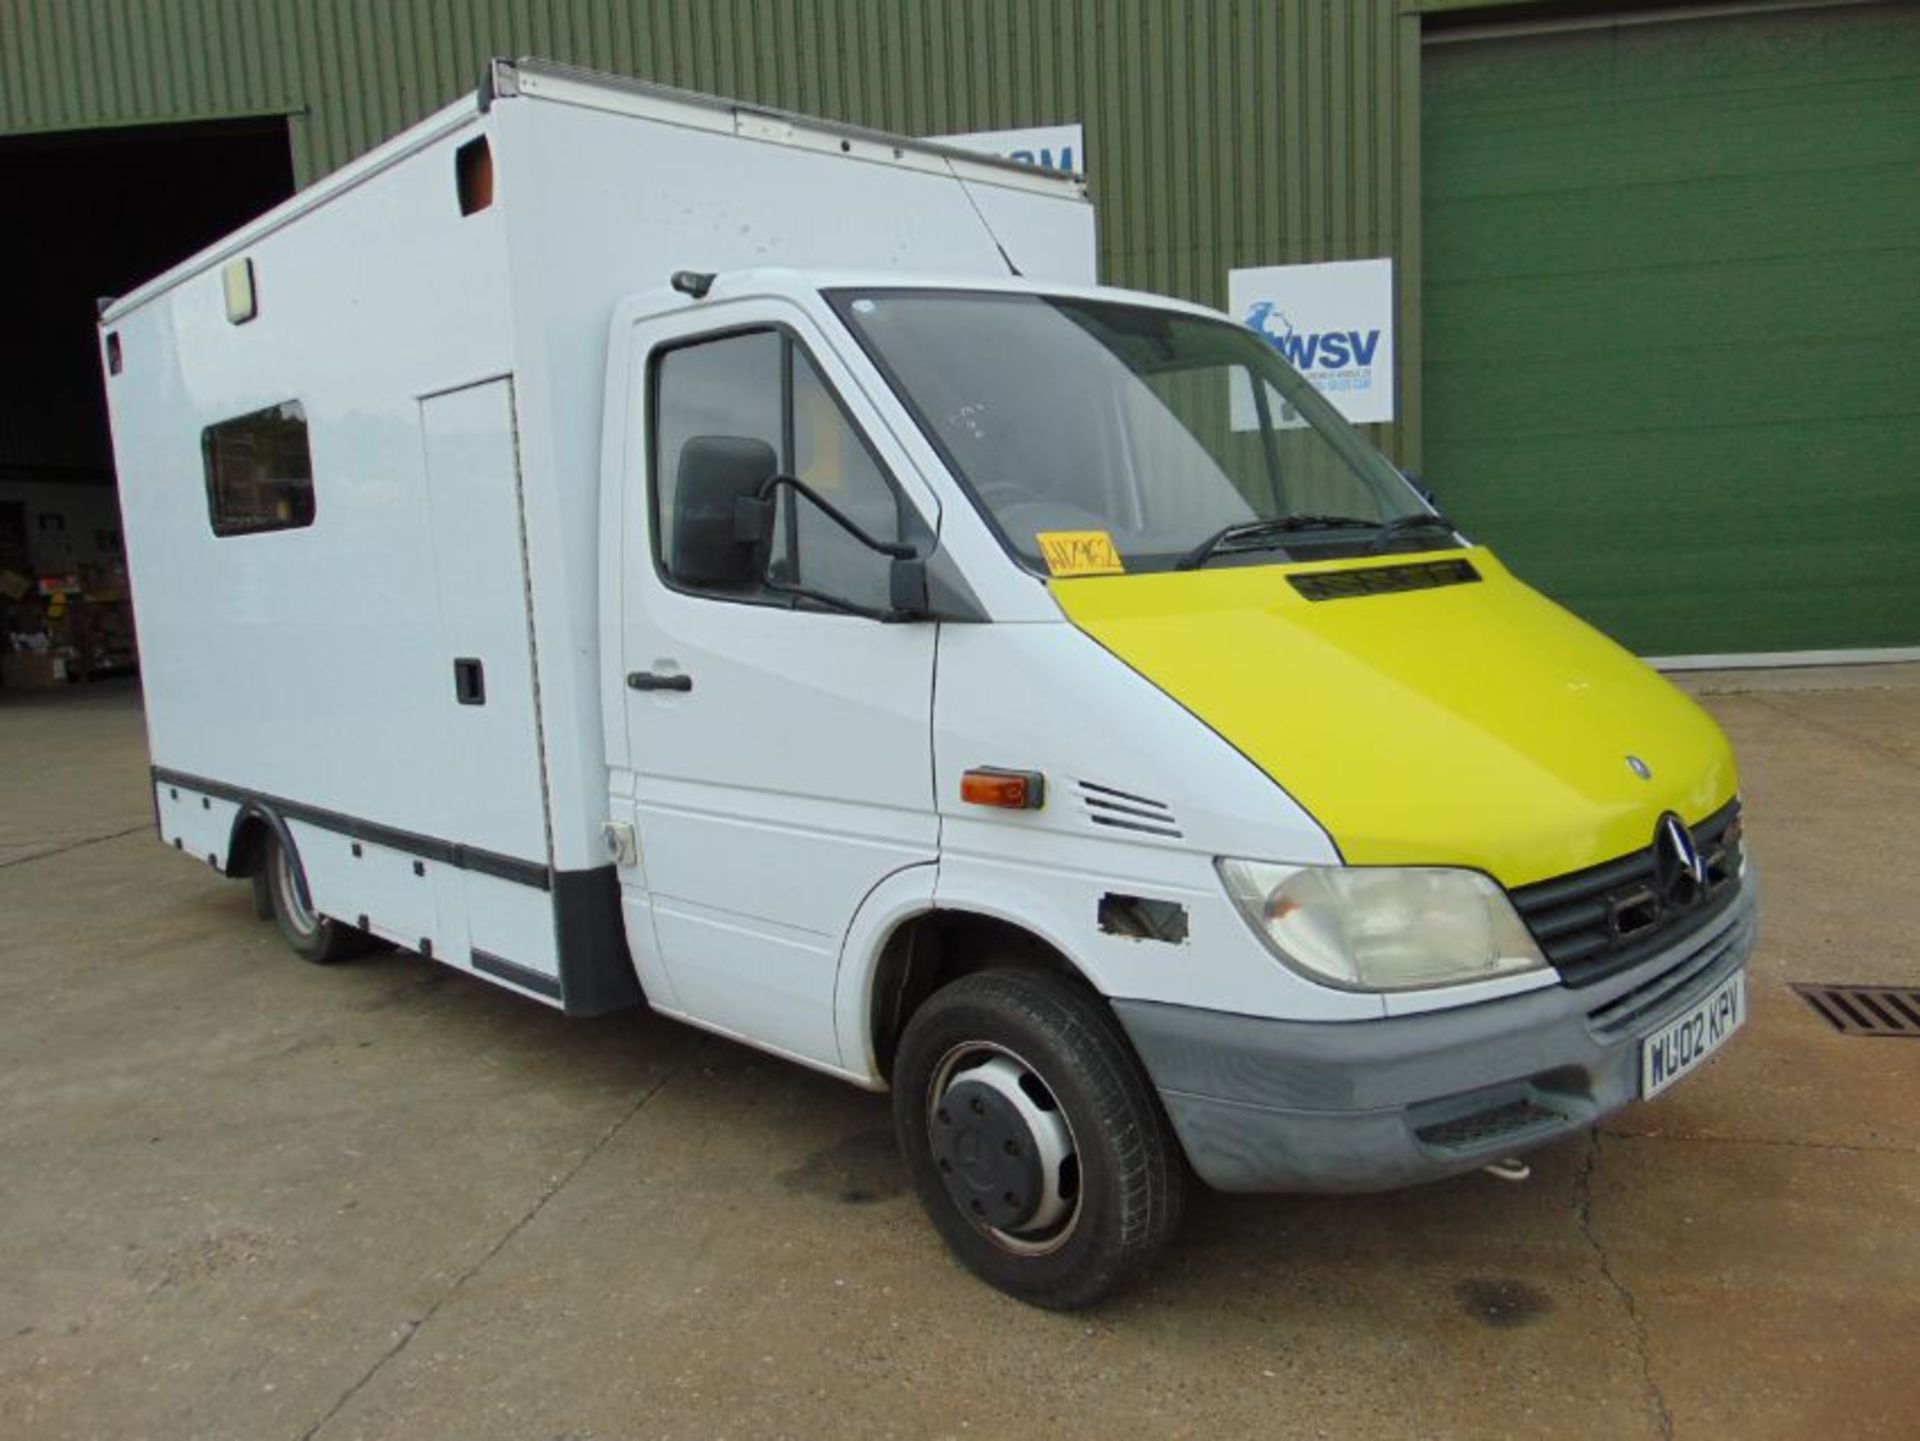 Recent Released by Atomic Weapons Establishment a 2002 Mercedes 418 CDi Ambulance ONLY 32,825 Miles!